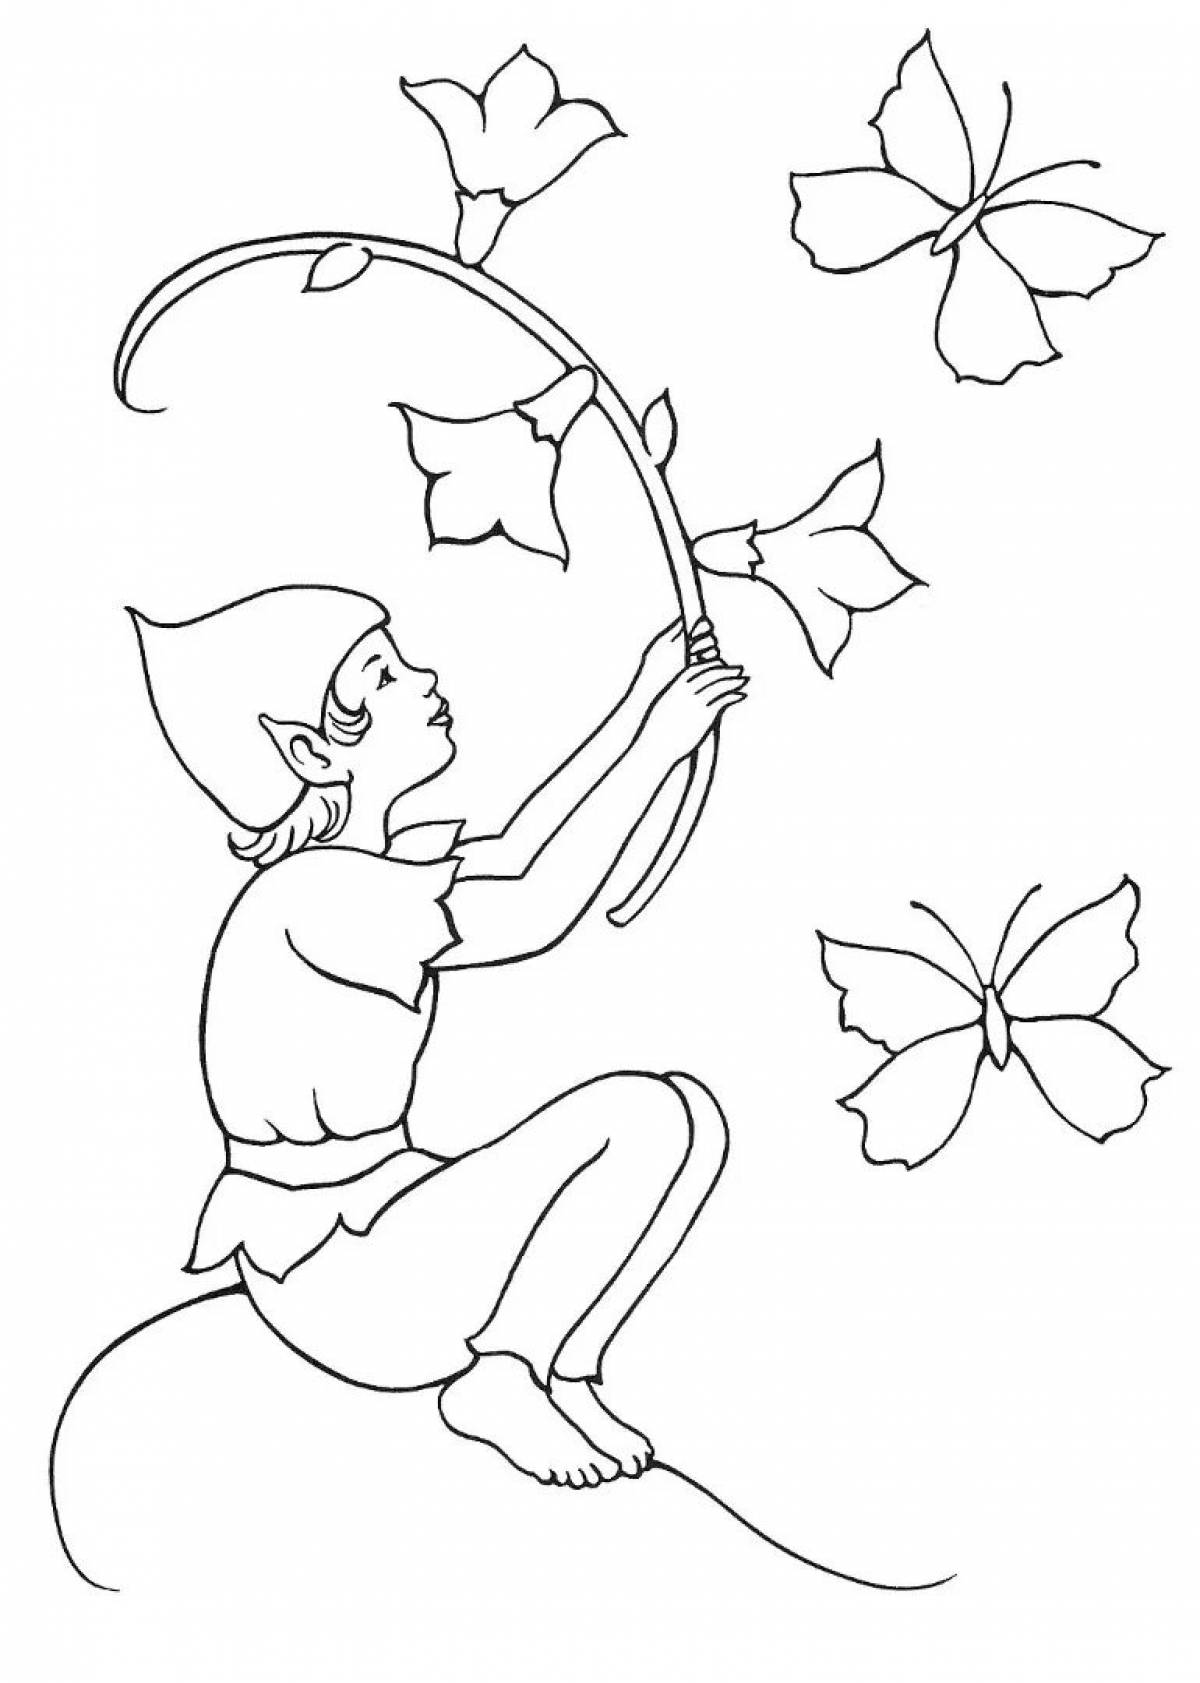 Inspirational elf coloring book for kids